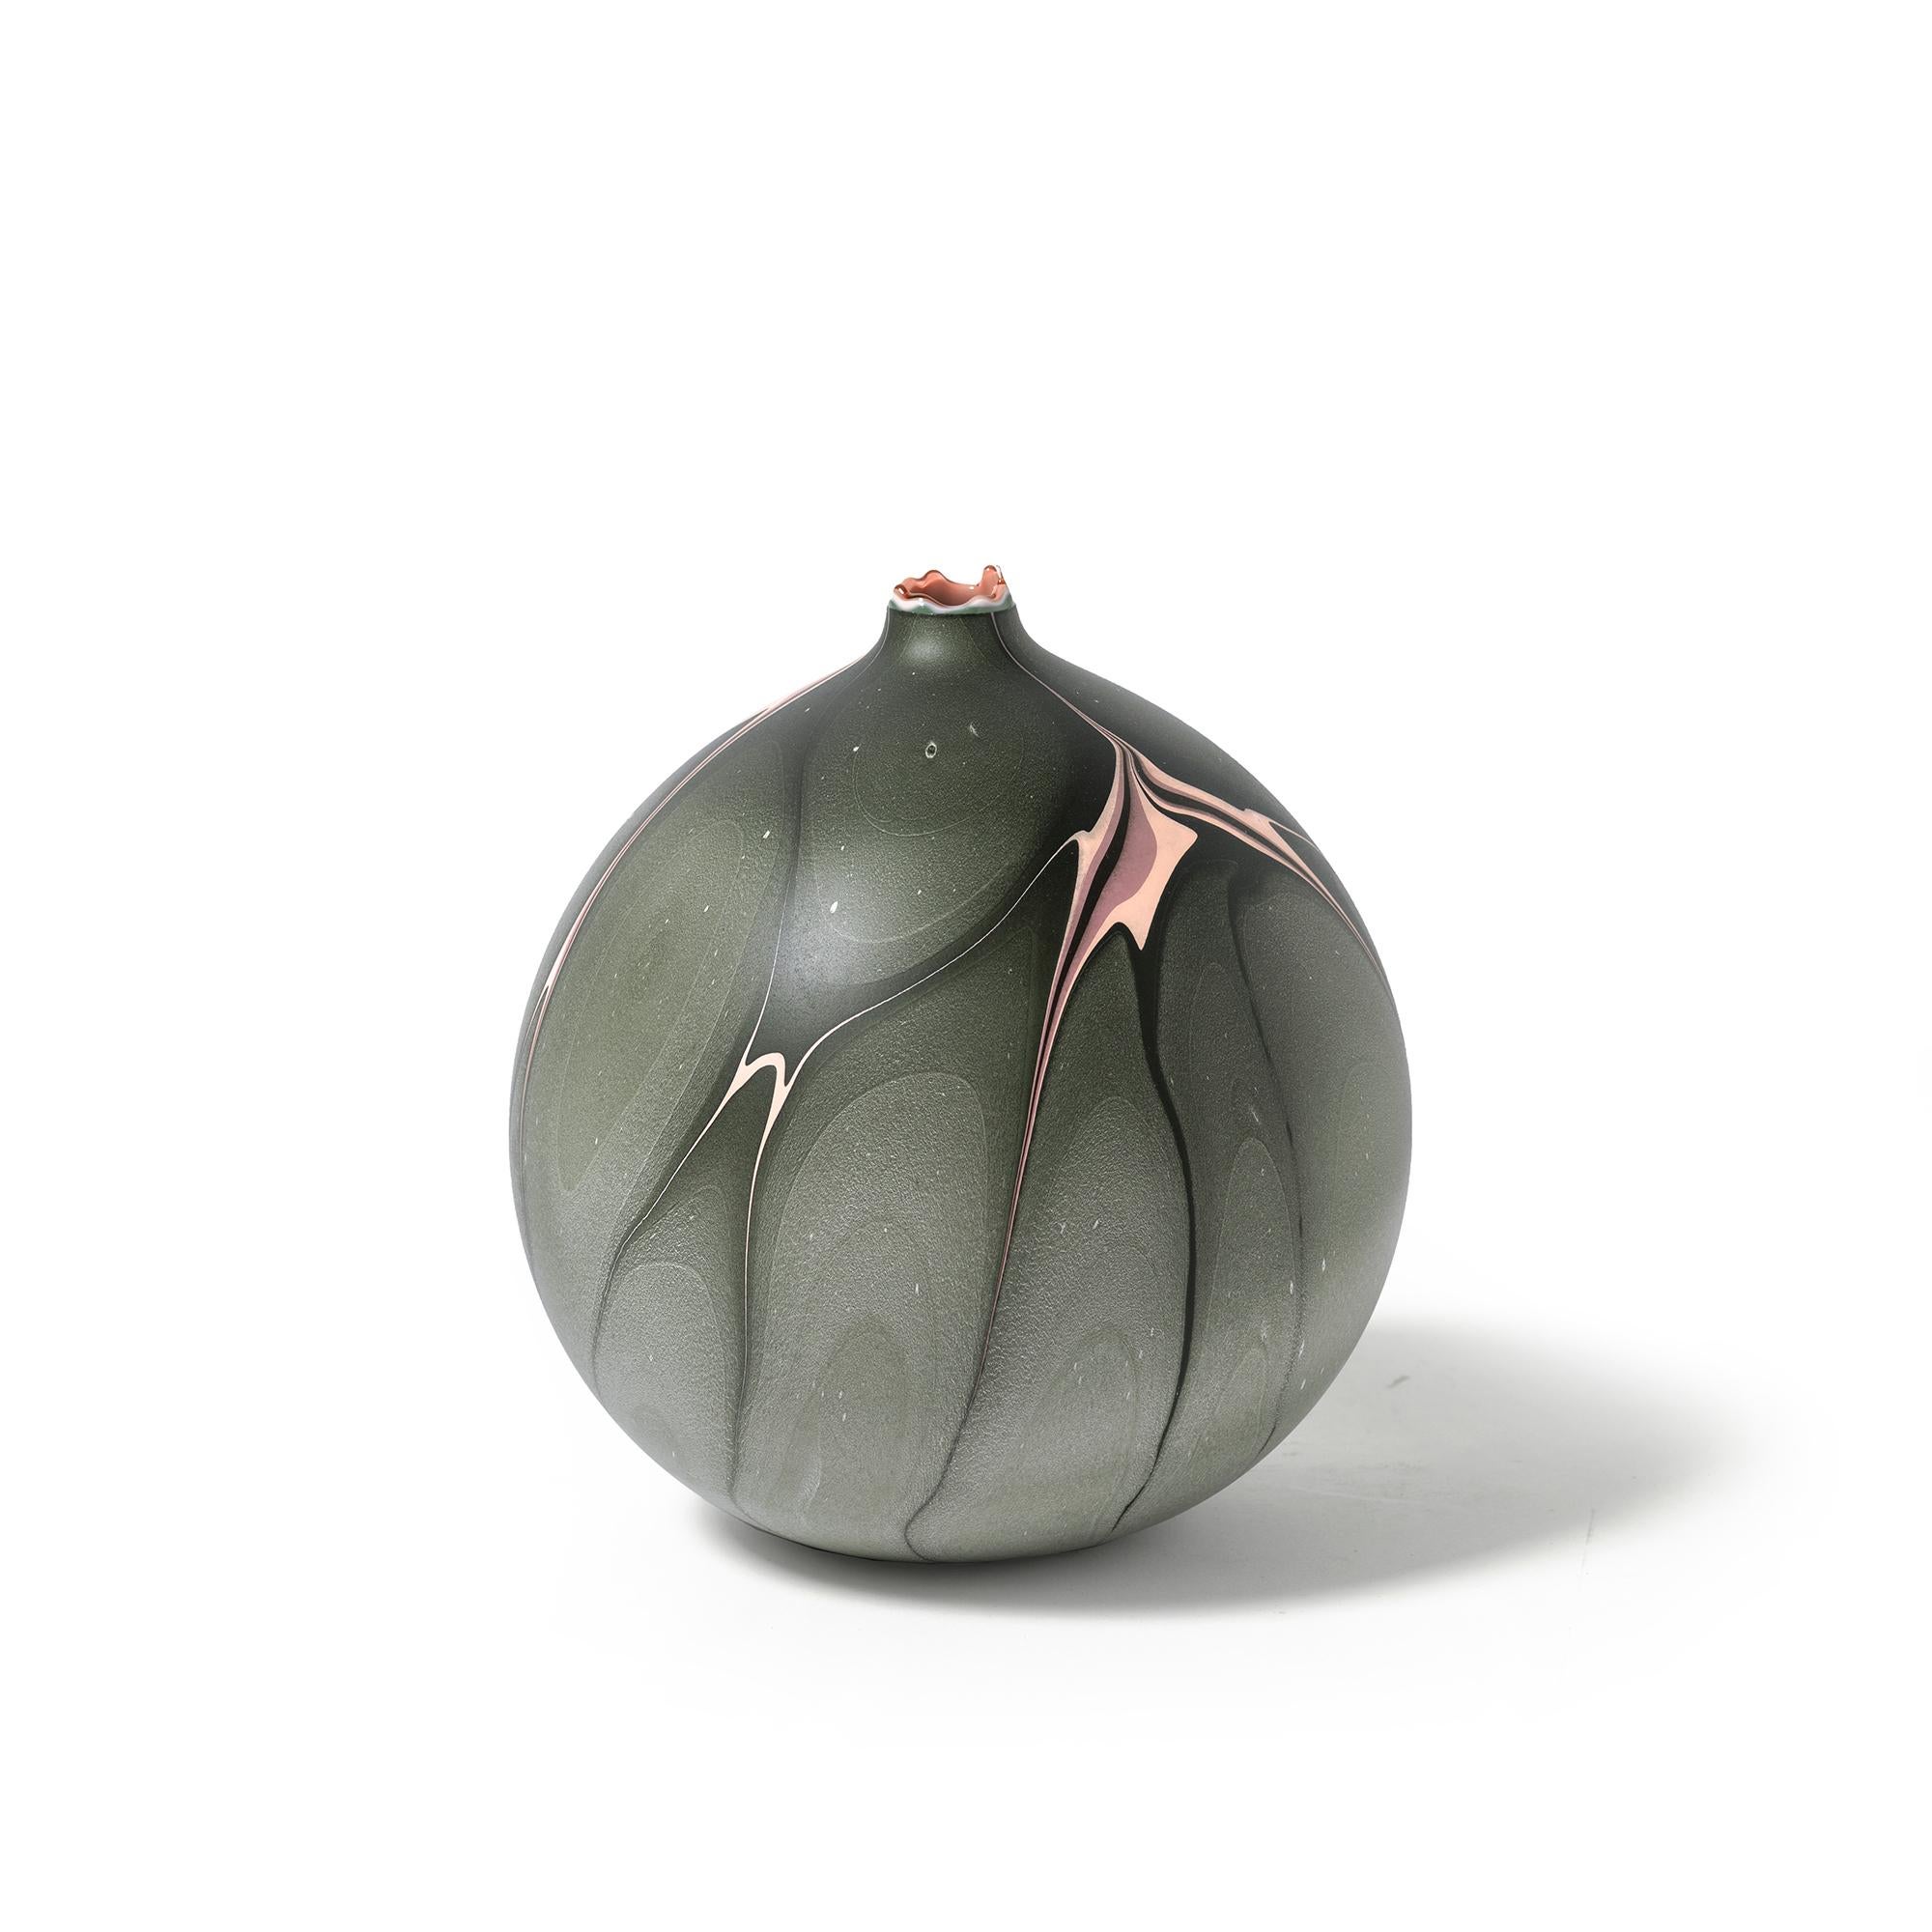 Amazon round hydro vase by Elyse Graham
Dimensions: W 20 x D 20 x H 23 cm
Materials: Plaster, Resin
Molded, dyed, and finished by hand in la. Customization
Available.
All pieces are made to order

Our new Hydro Vases take on a futuristic